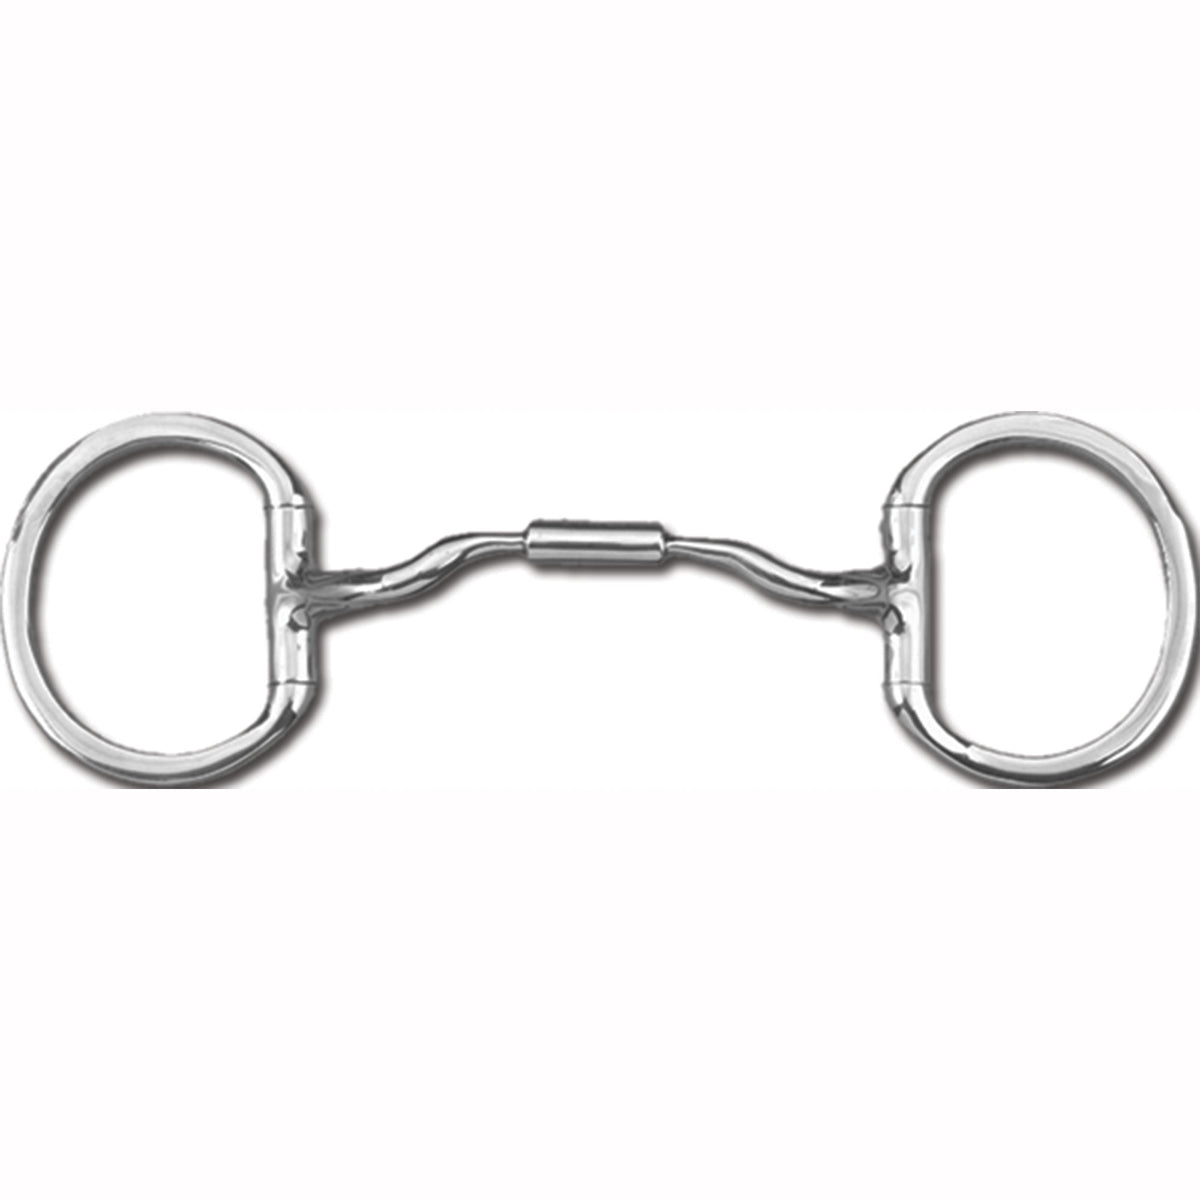 Toklat Myler Eggbutt without Hooks with Stainless Steel Low Port Comfort Snaffle MB 04